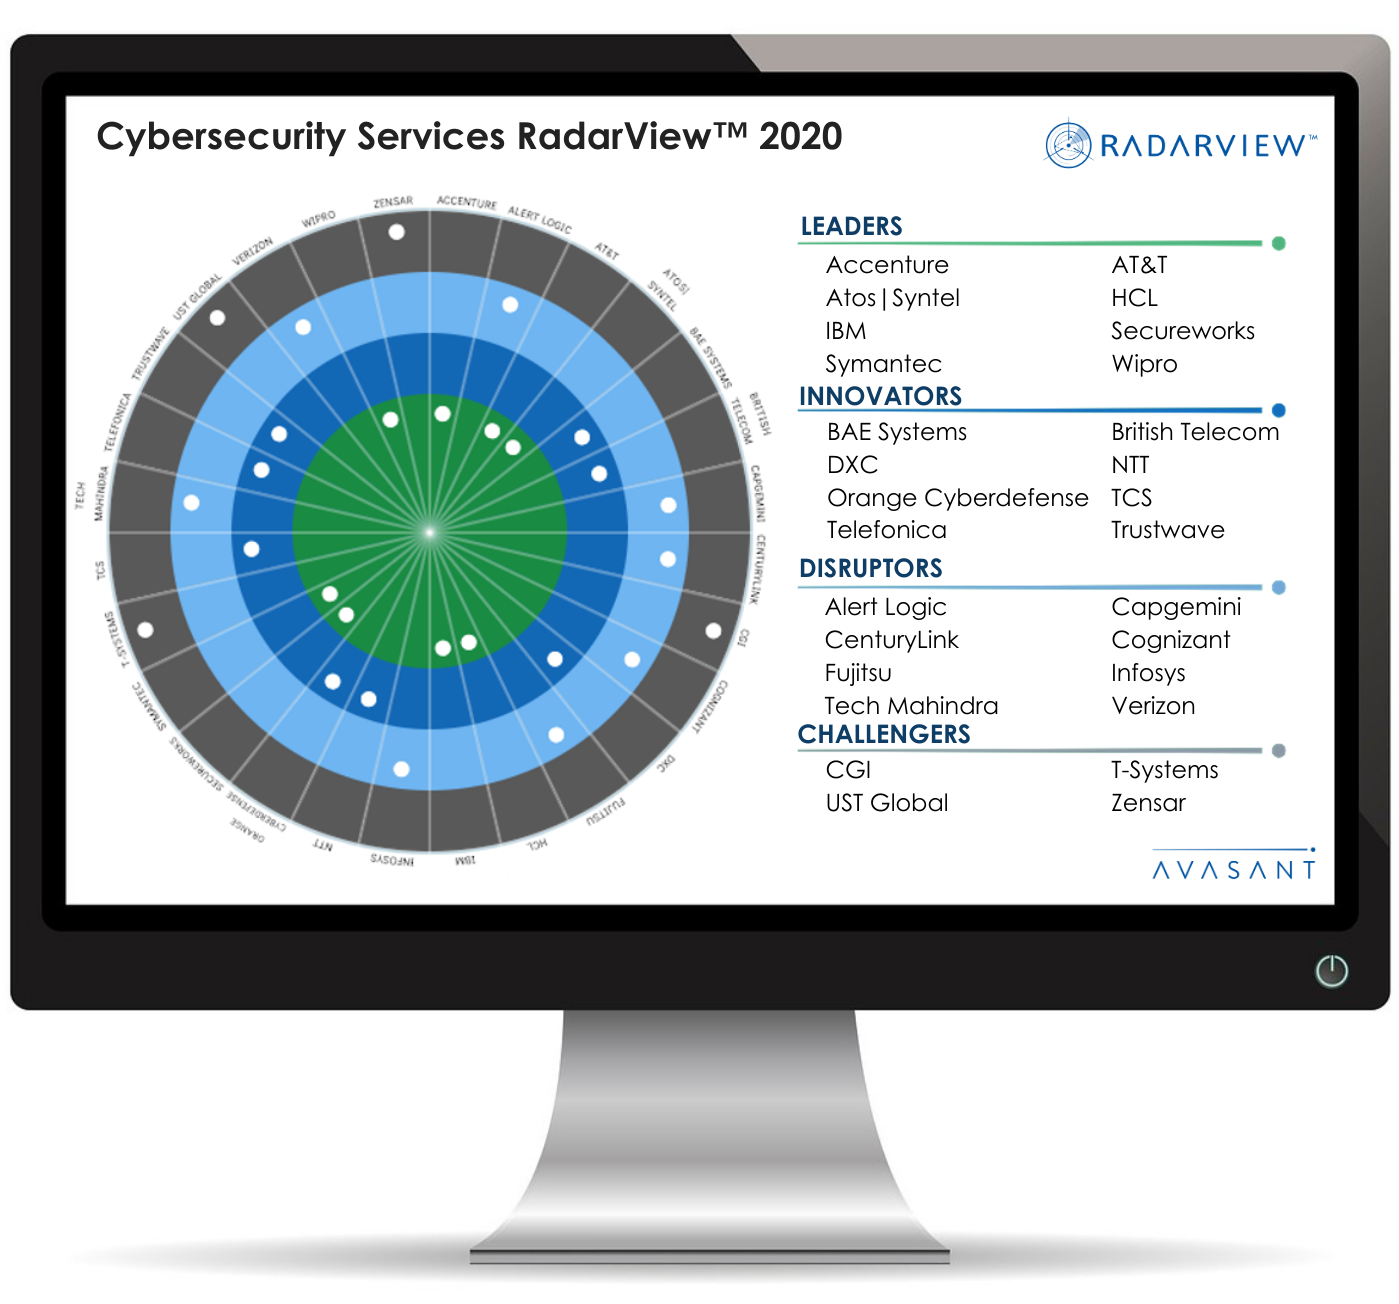 Cybersecurity RV 1 1 - Cybersecurity Services RadarView™ 2020 - Orange Cyberdefense